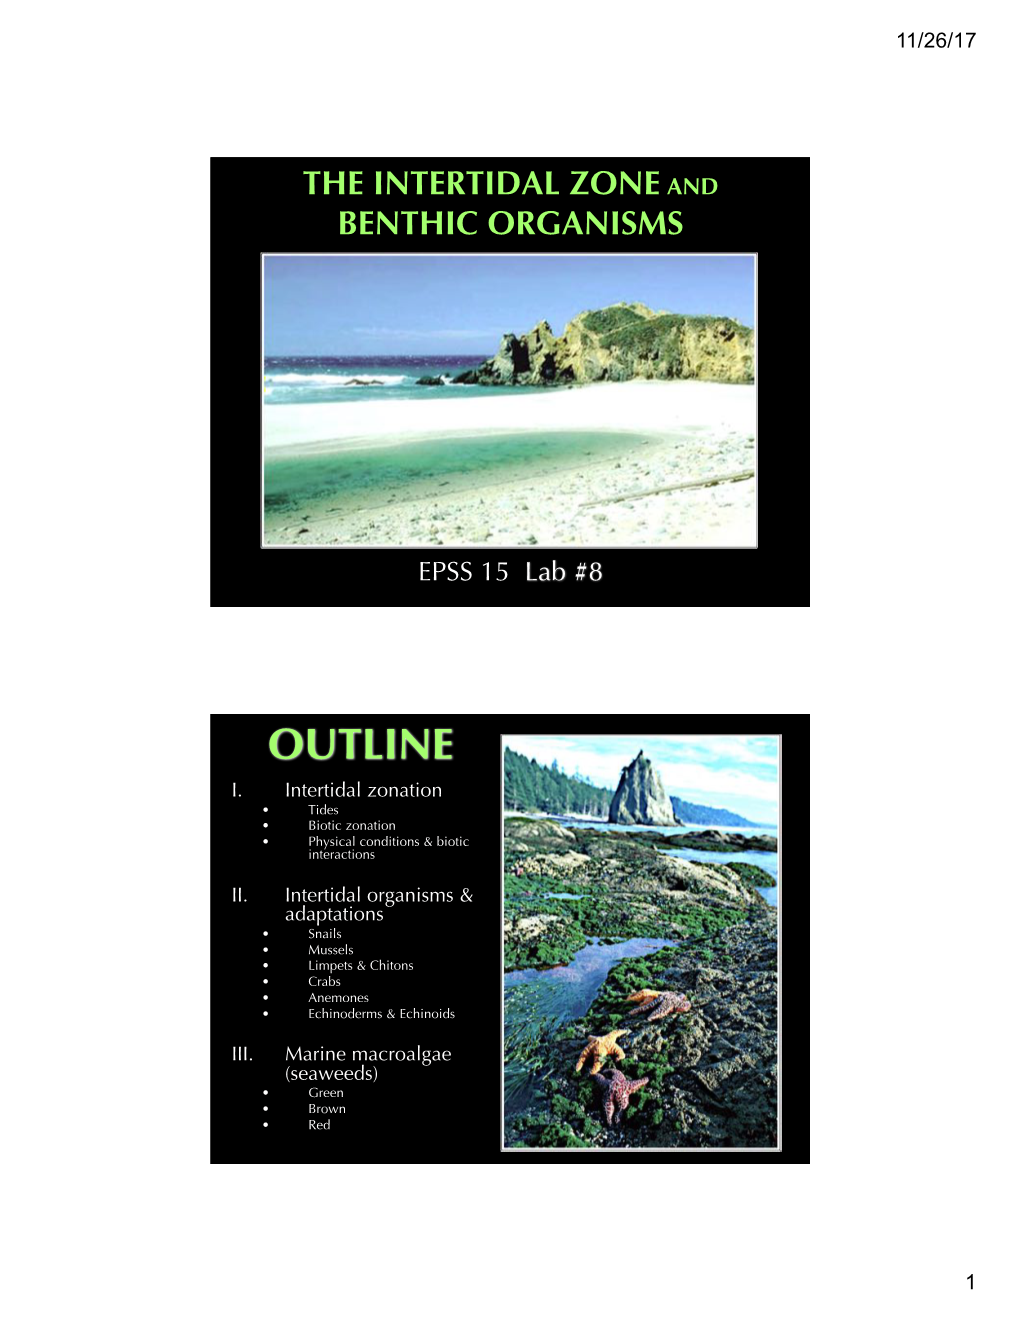 The Intertidal Zone and Benthic Organisms